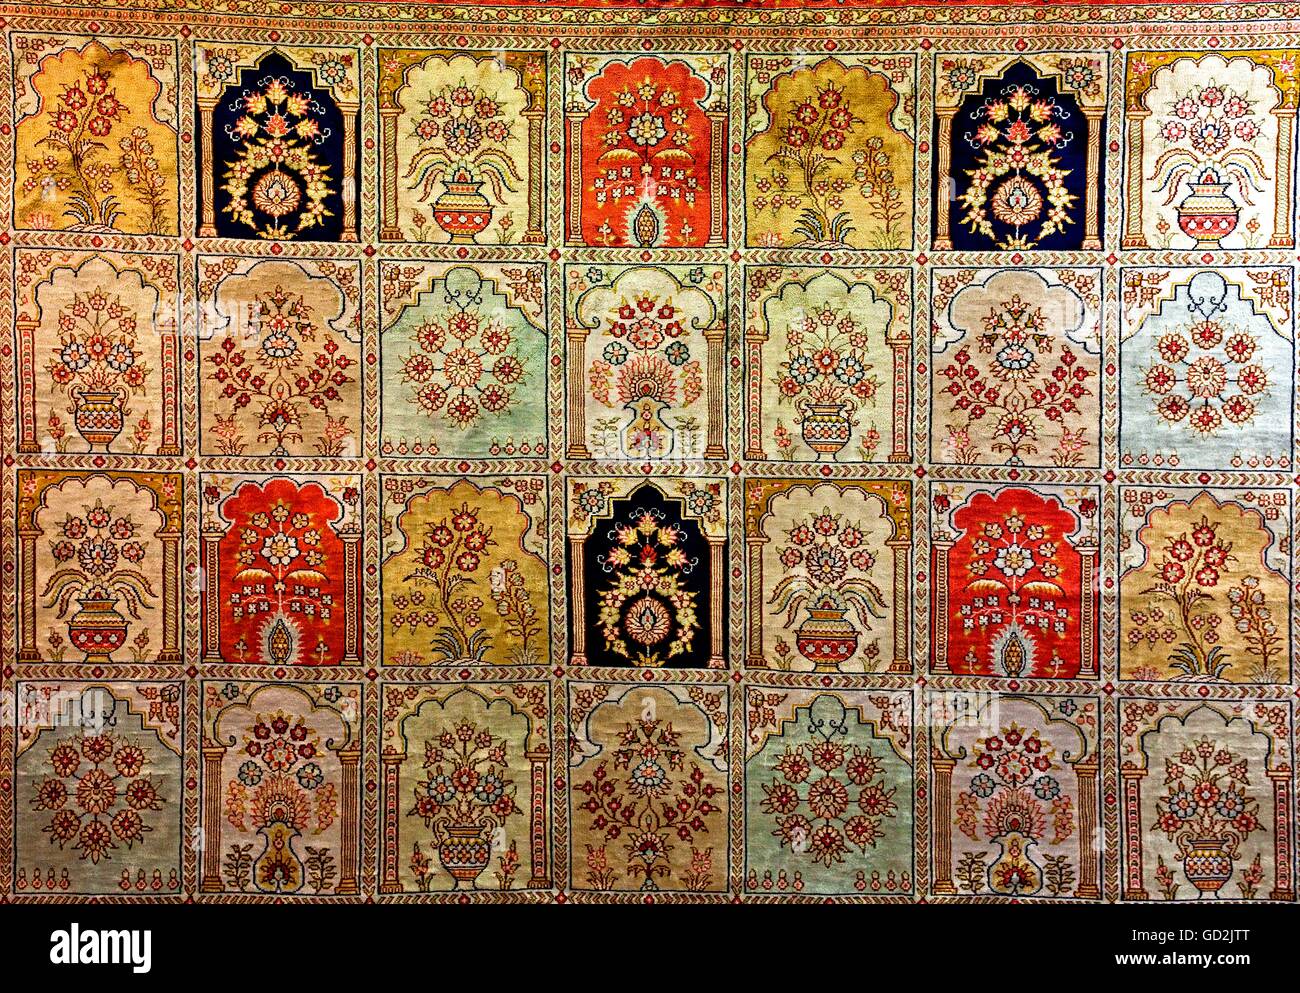 fine arts, carpet, ornament, Great bazaar, Kapali Carsi, Istanbul, Artist's Copyright has not to be cleared Stock Photo